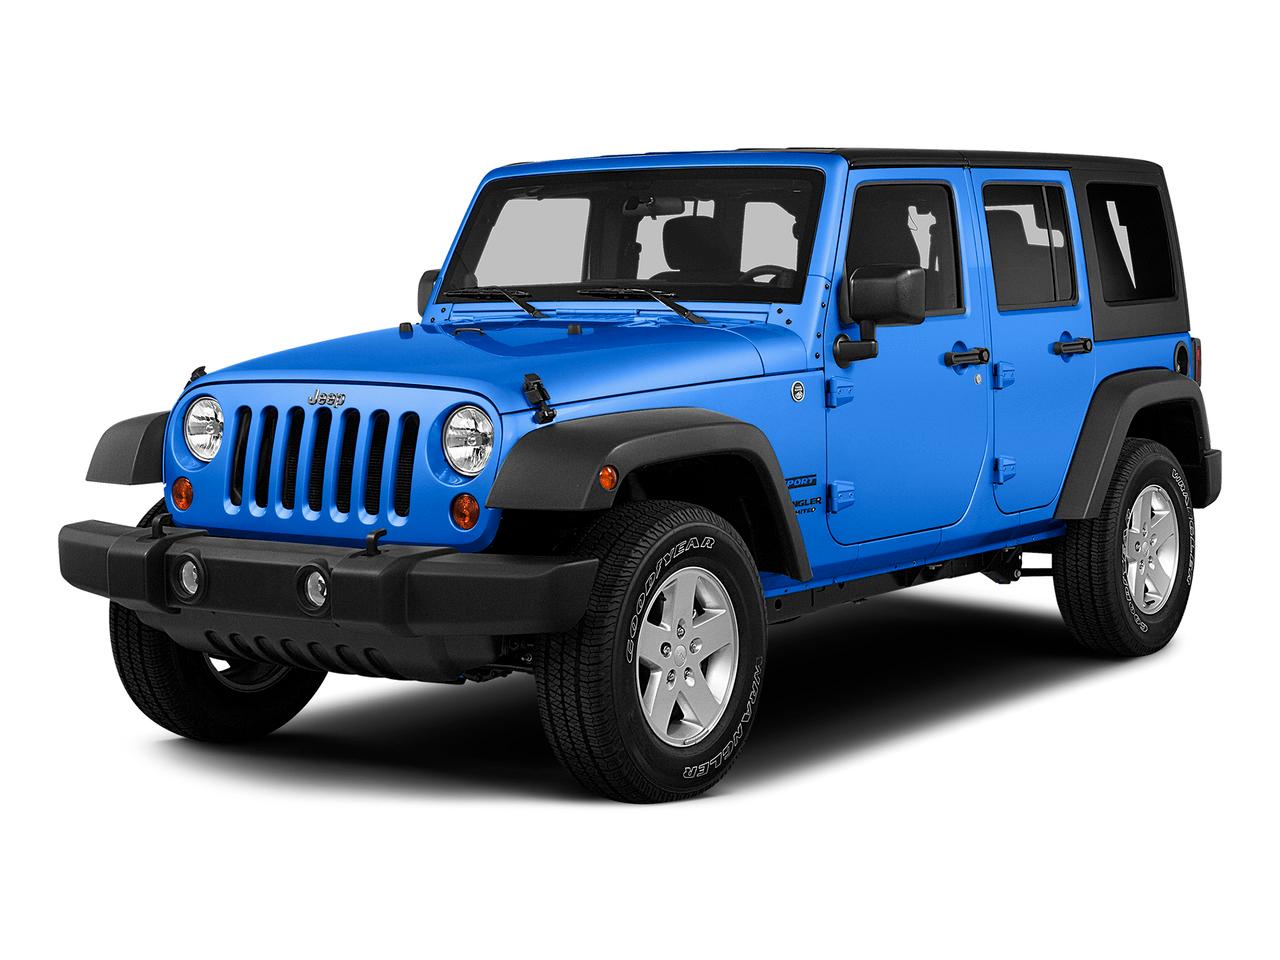 Used 2015 Jeep Wrangler Unlimited 4WD 4dr Sport in Blue for sale in  CHADRON, Nebraska - T2397